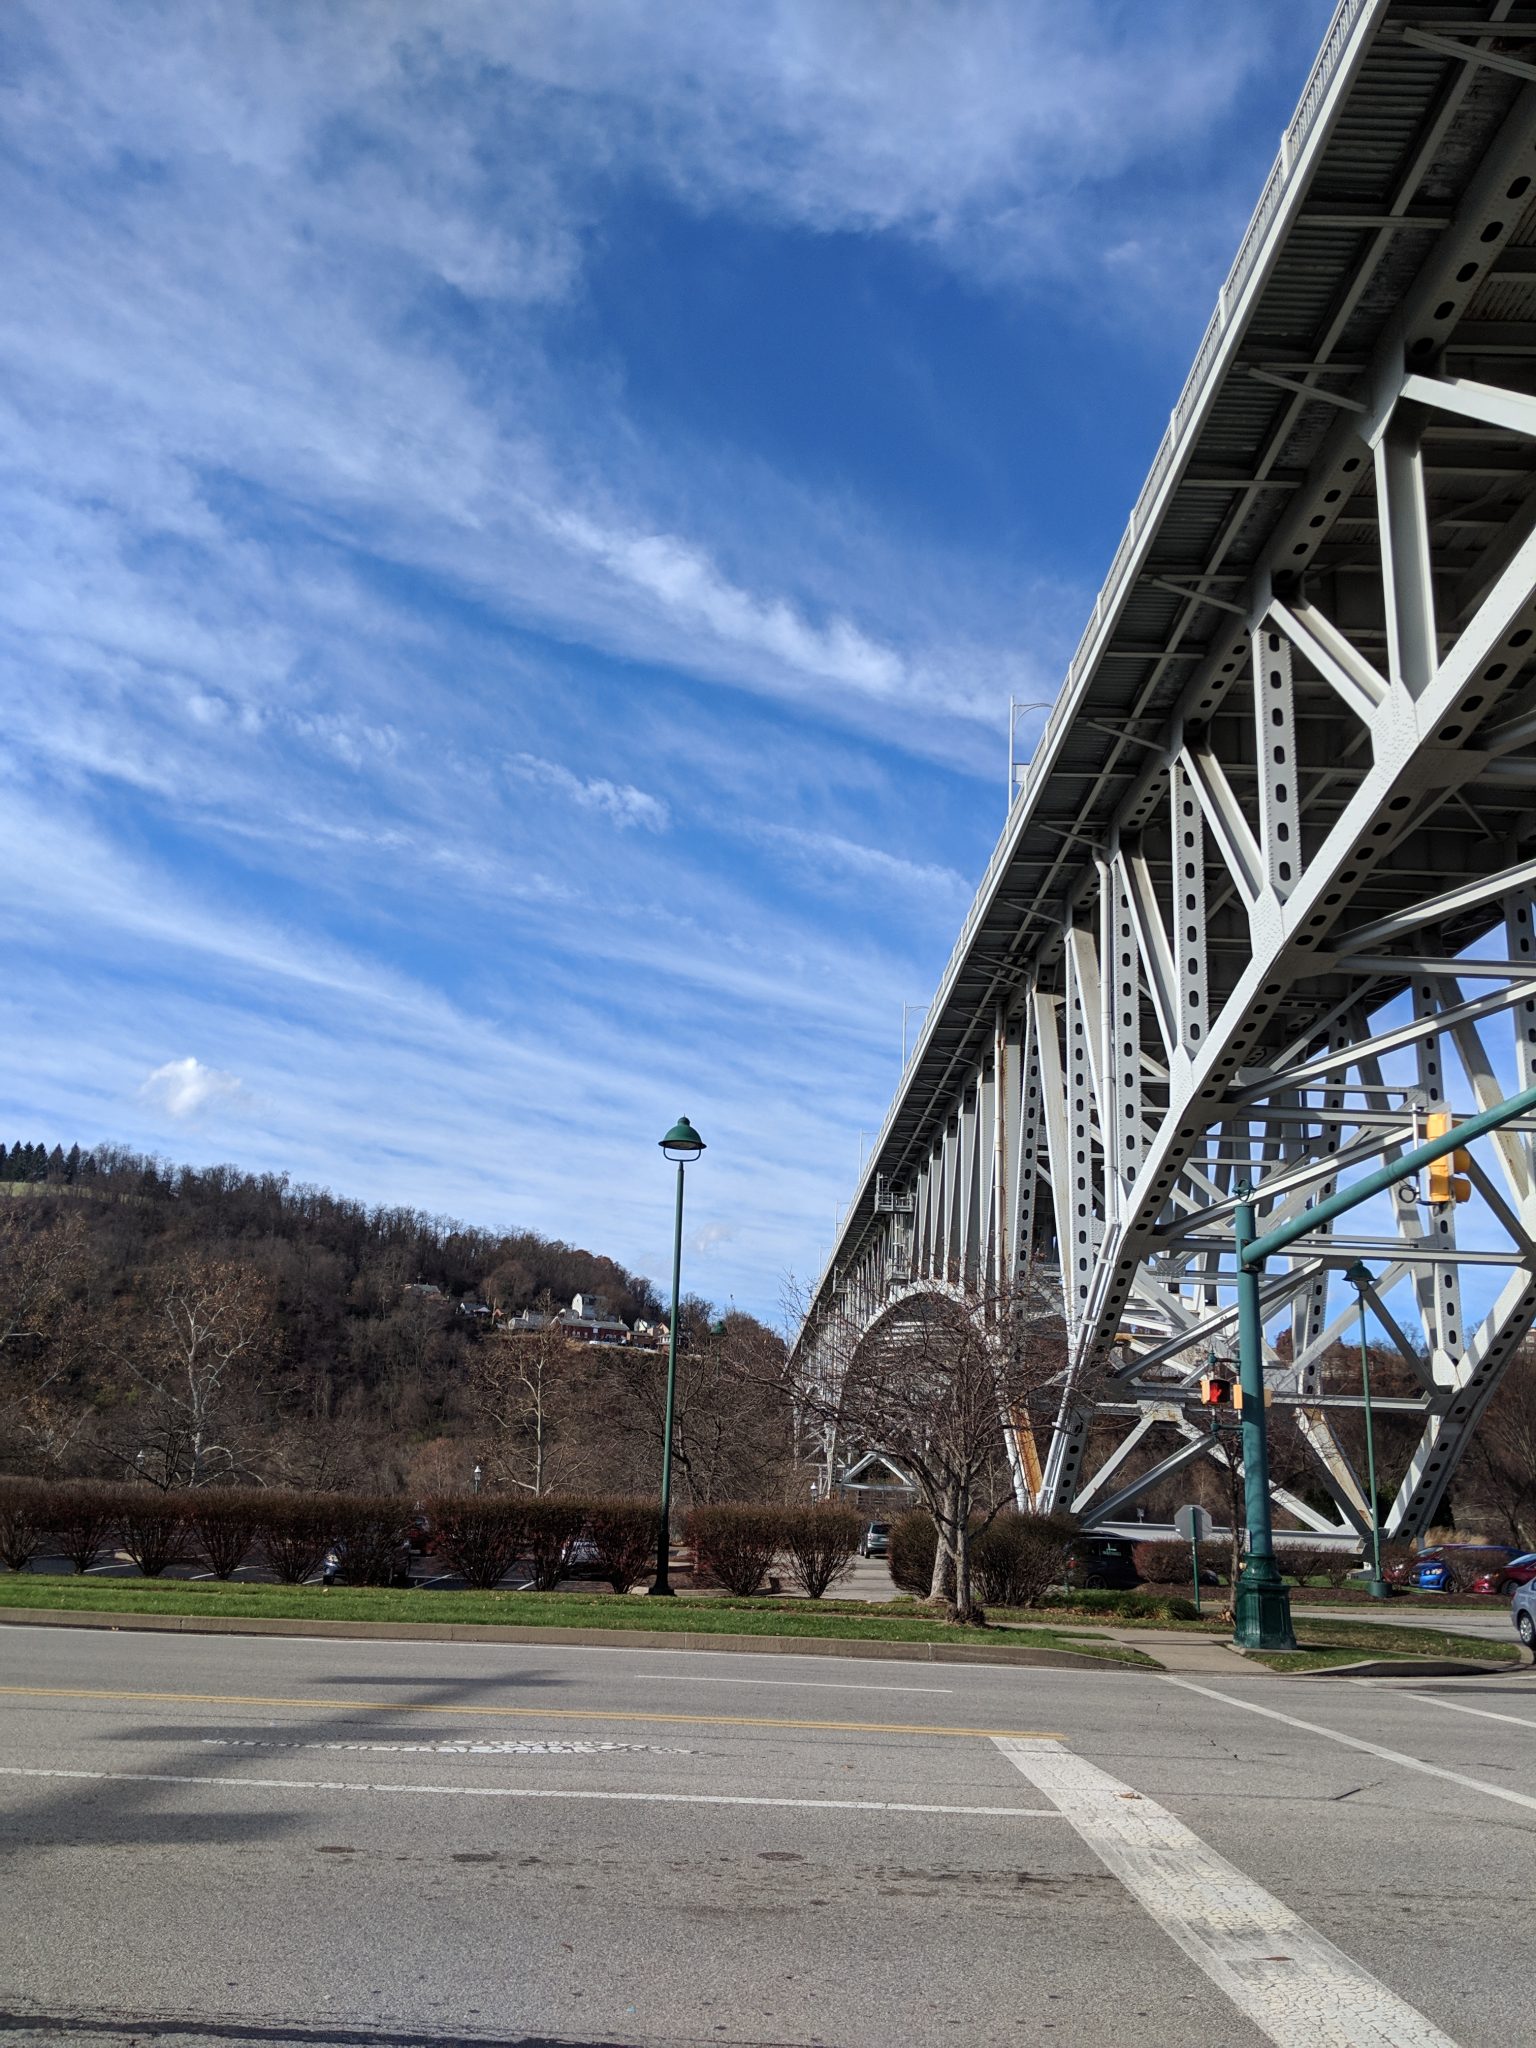 The Homestead High Level Bridge, from below, between Pittsburgh, PA and Homestead, PA